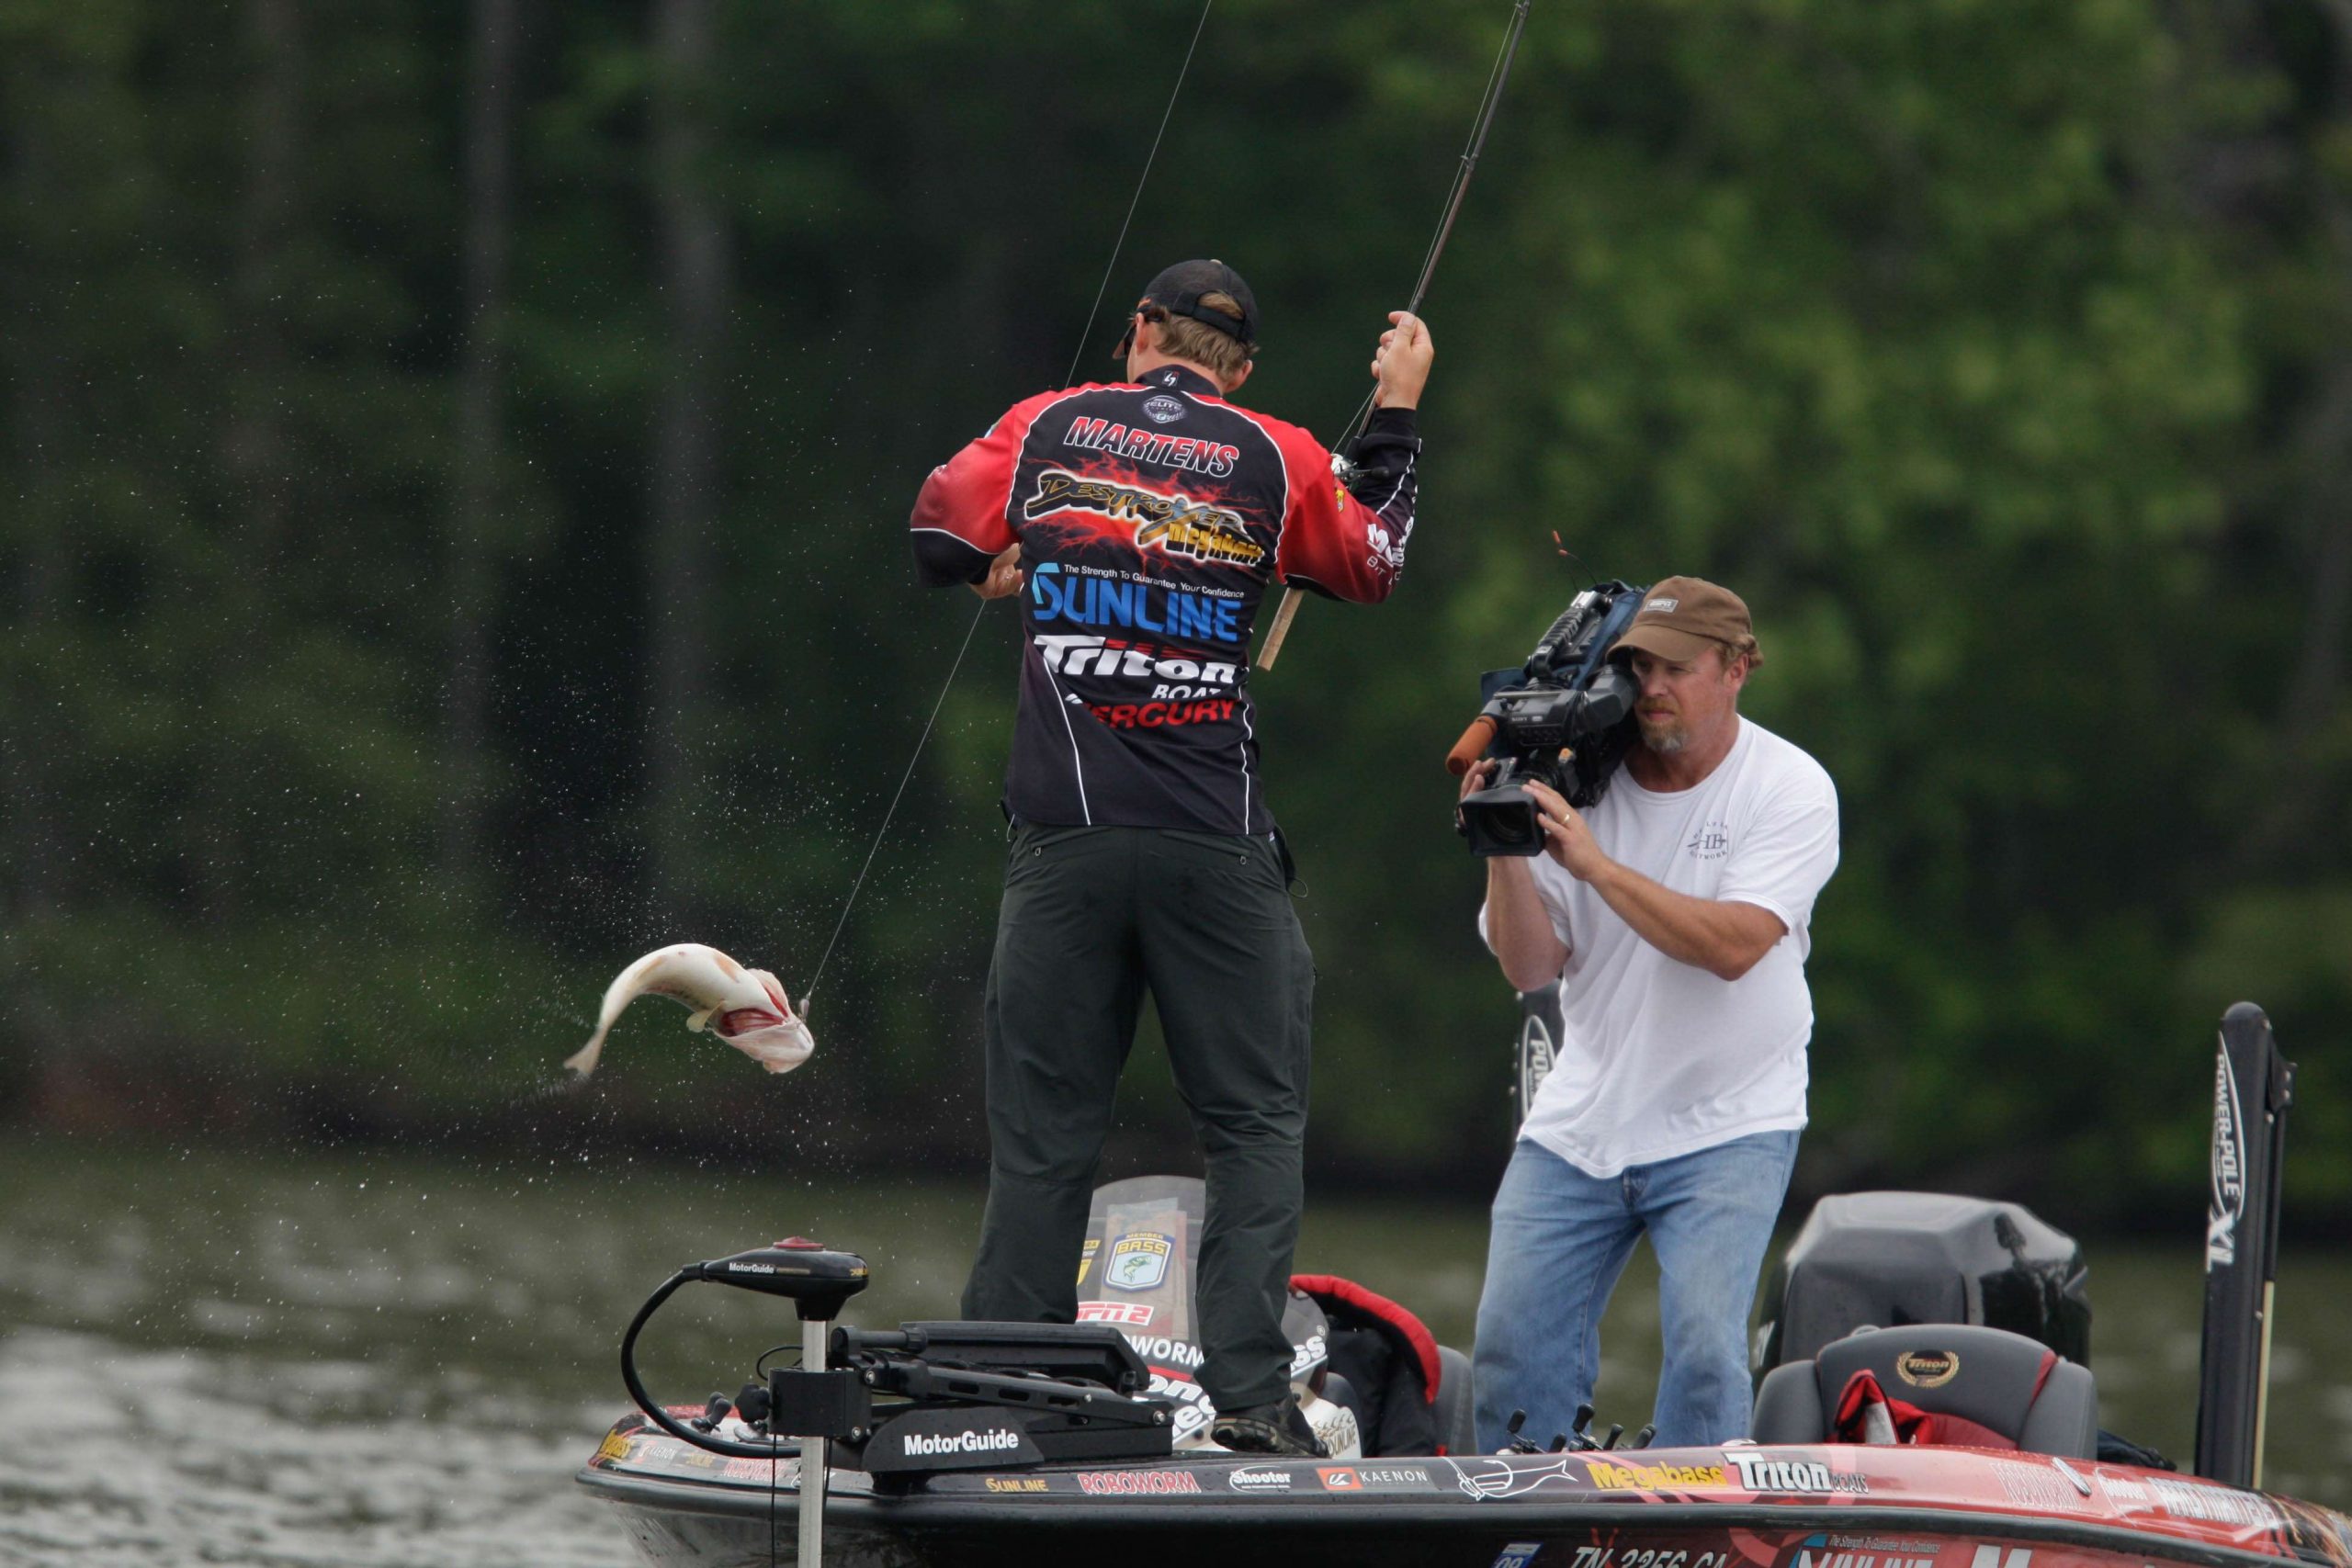 Martens had put around 30 waypoints into his GPS during practice, and he ended up only fishing half of them.